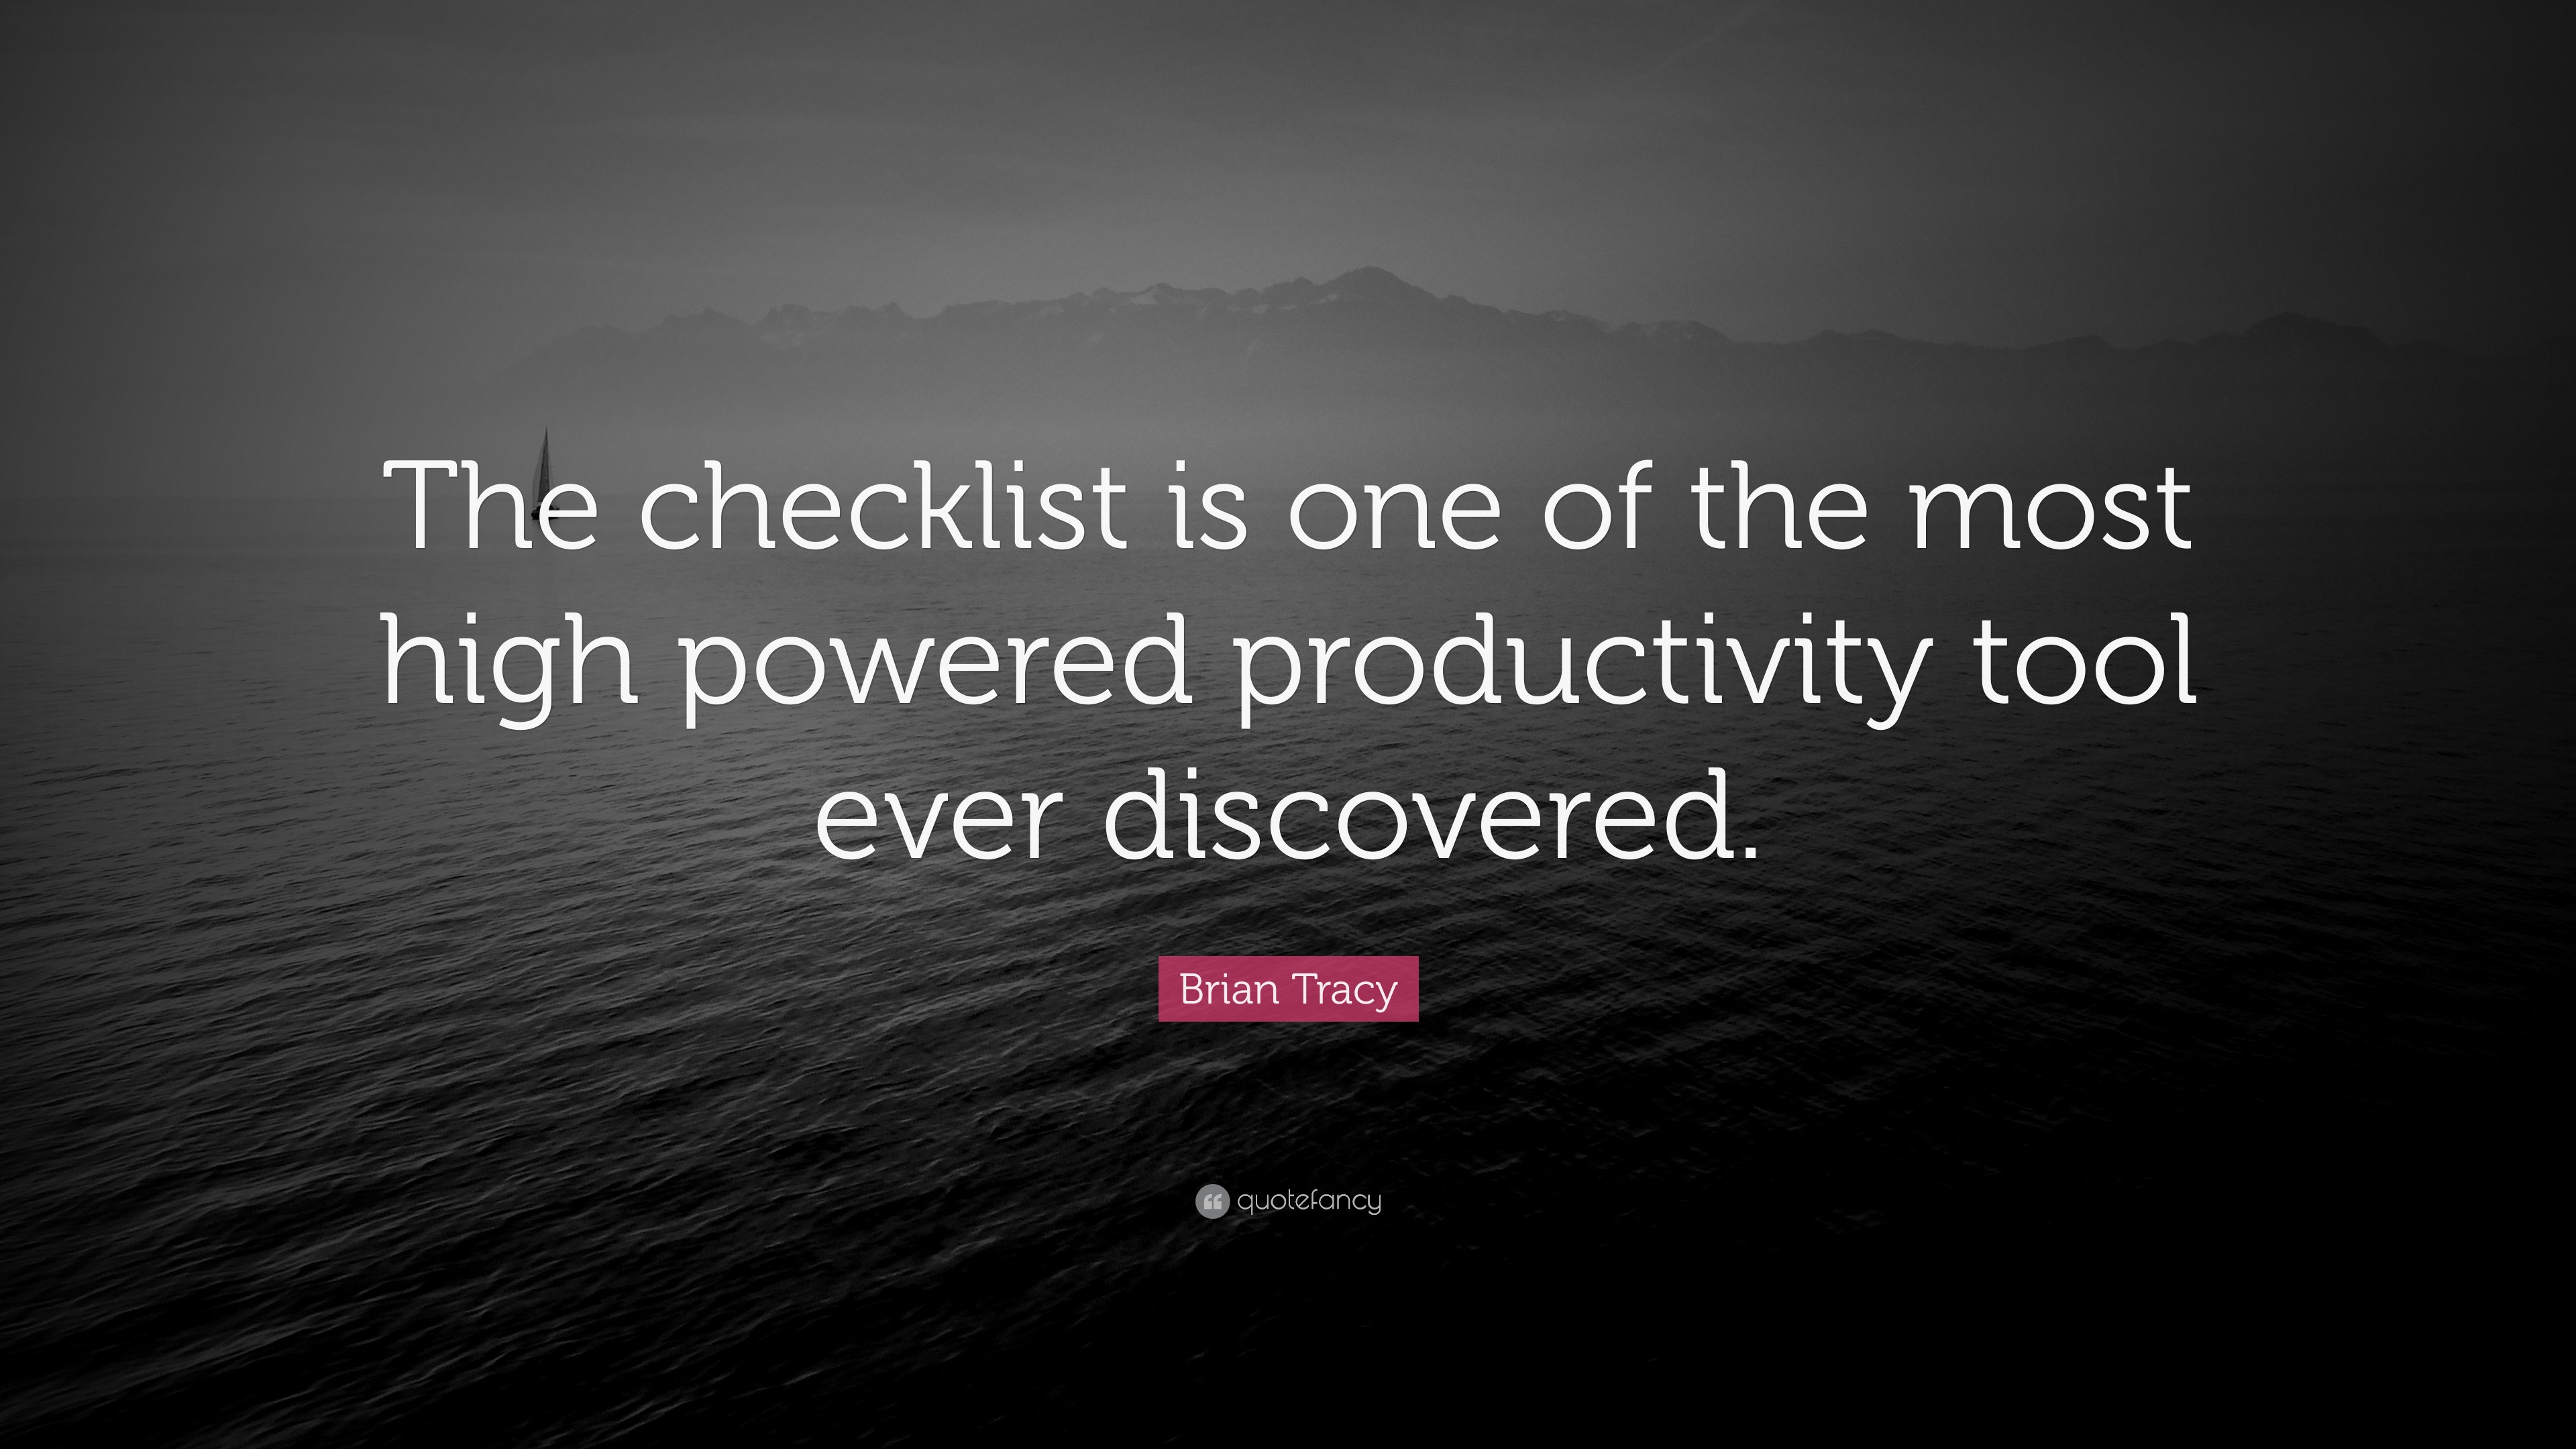 https://quotefancy.com/media/wallpaper/3840x2160/2250236-Brian-Tracy-Quote-The-checklist-is-one-of-the-most-high-powered.jpg